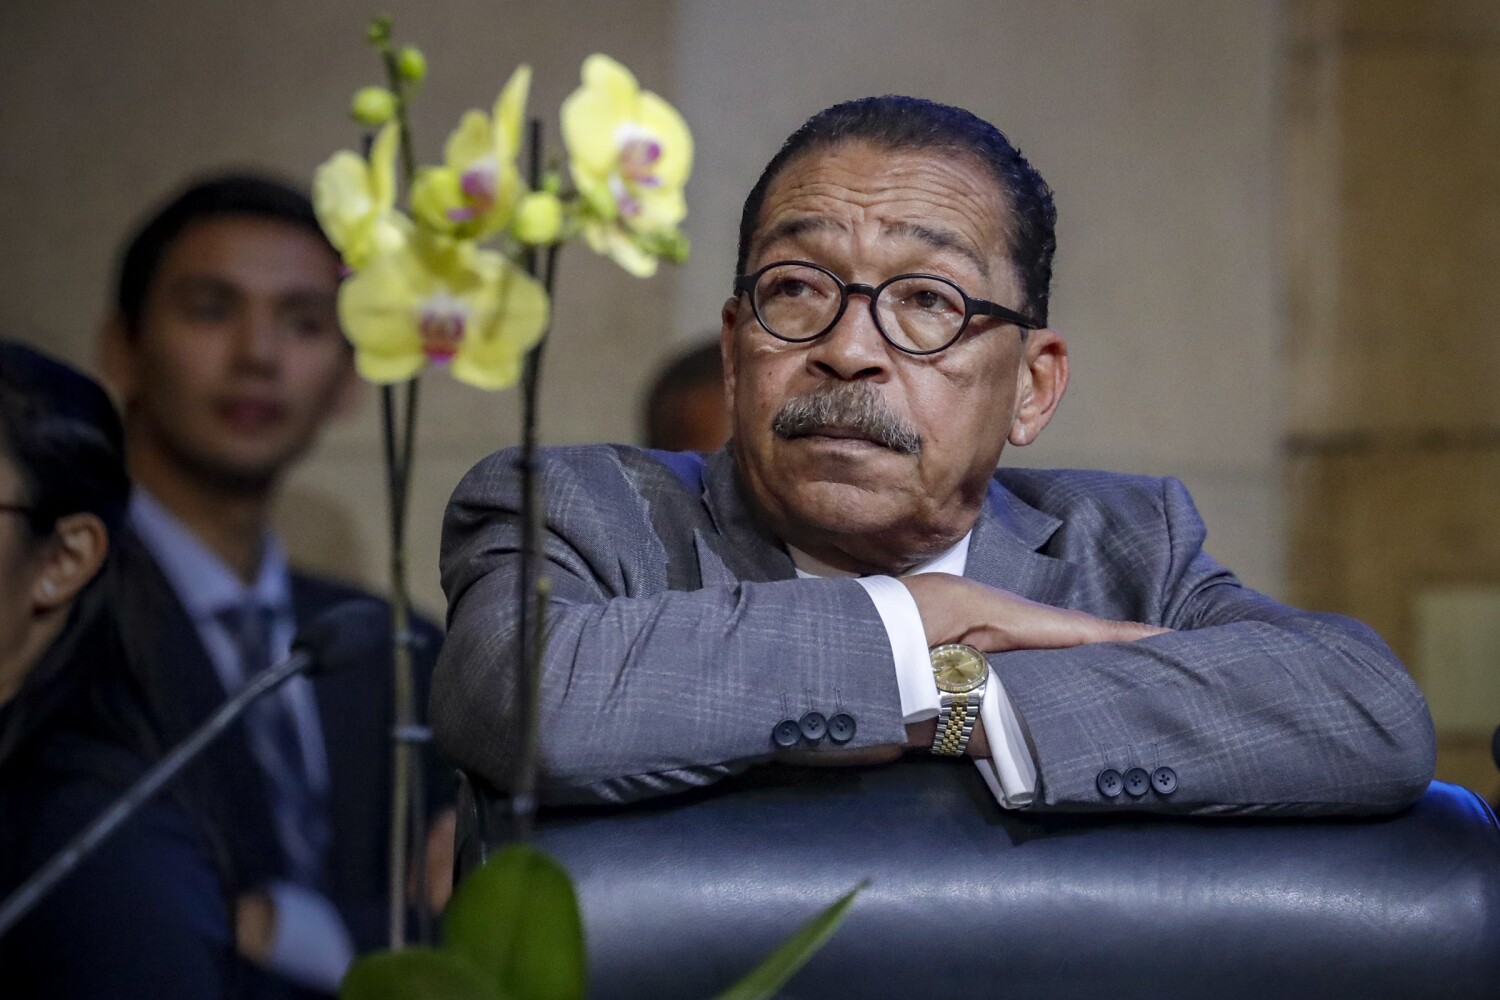 Judge rules that Herb Wesson cannot rejoin the City Council